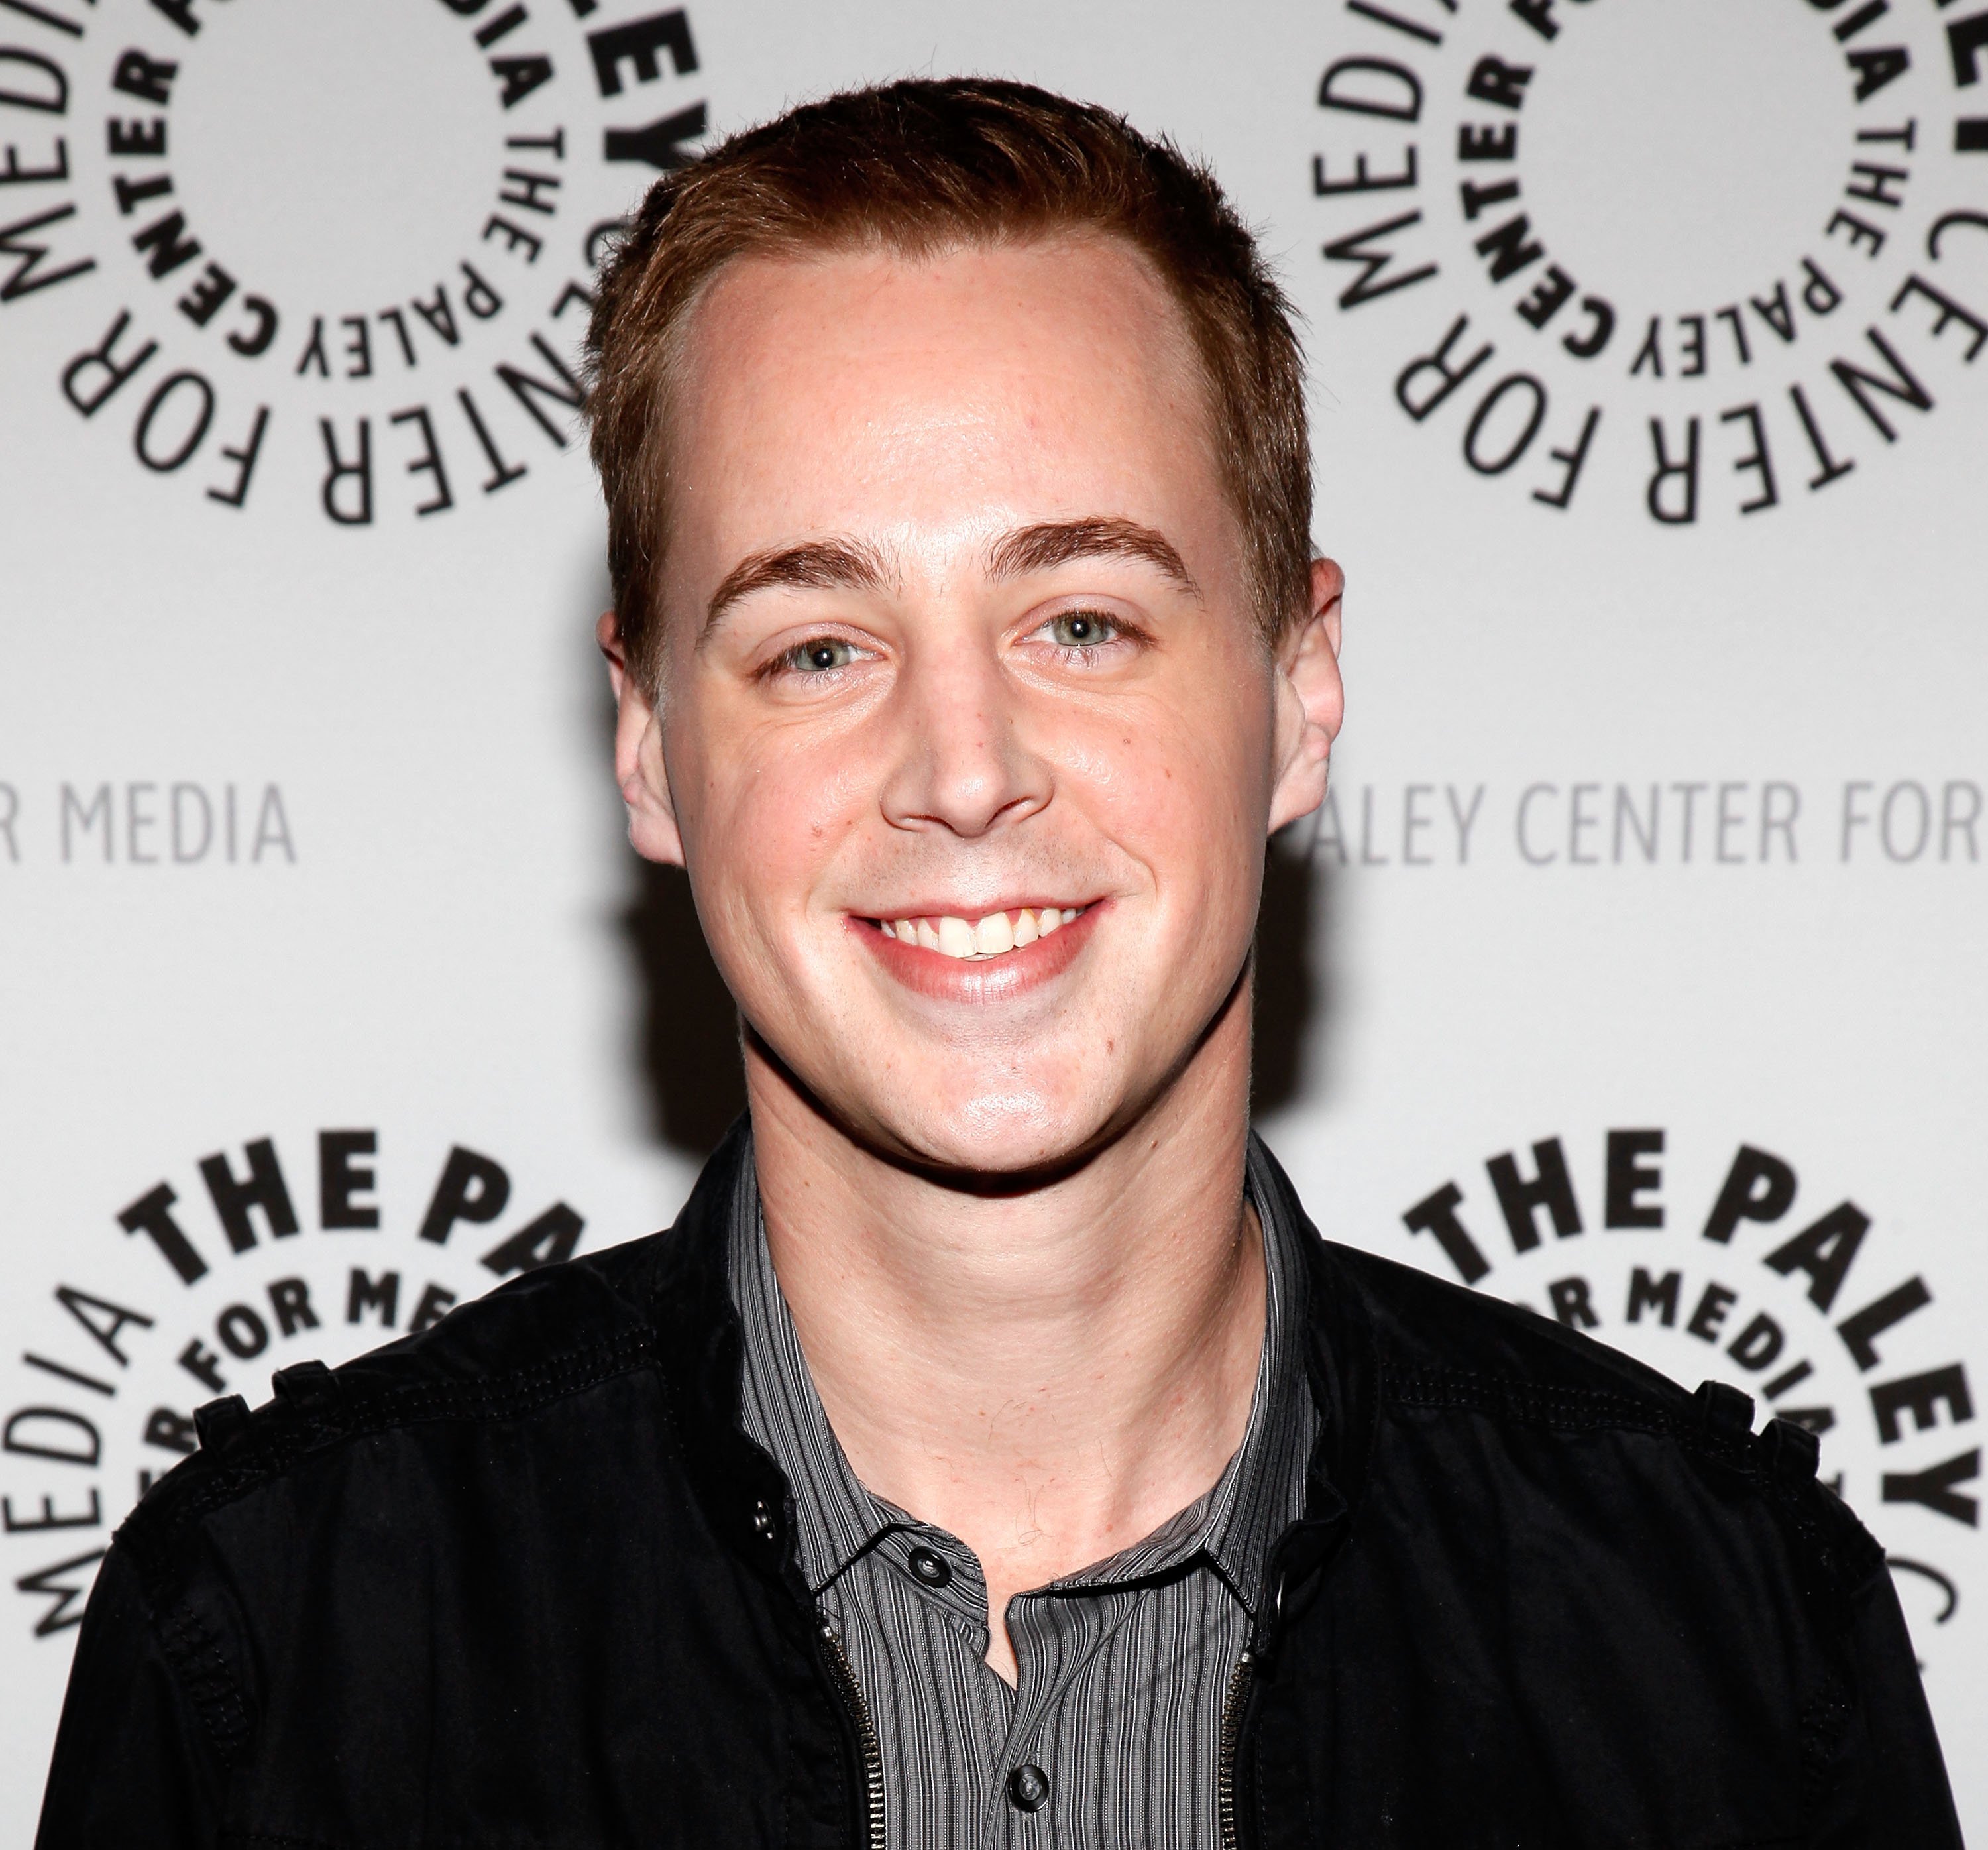 Sean Murray at the 27th annual PaleyFest - "NCIS" on March 1, 2010, in Beverly Hills, California | Source: Getty Images